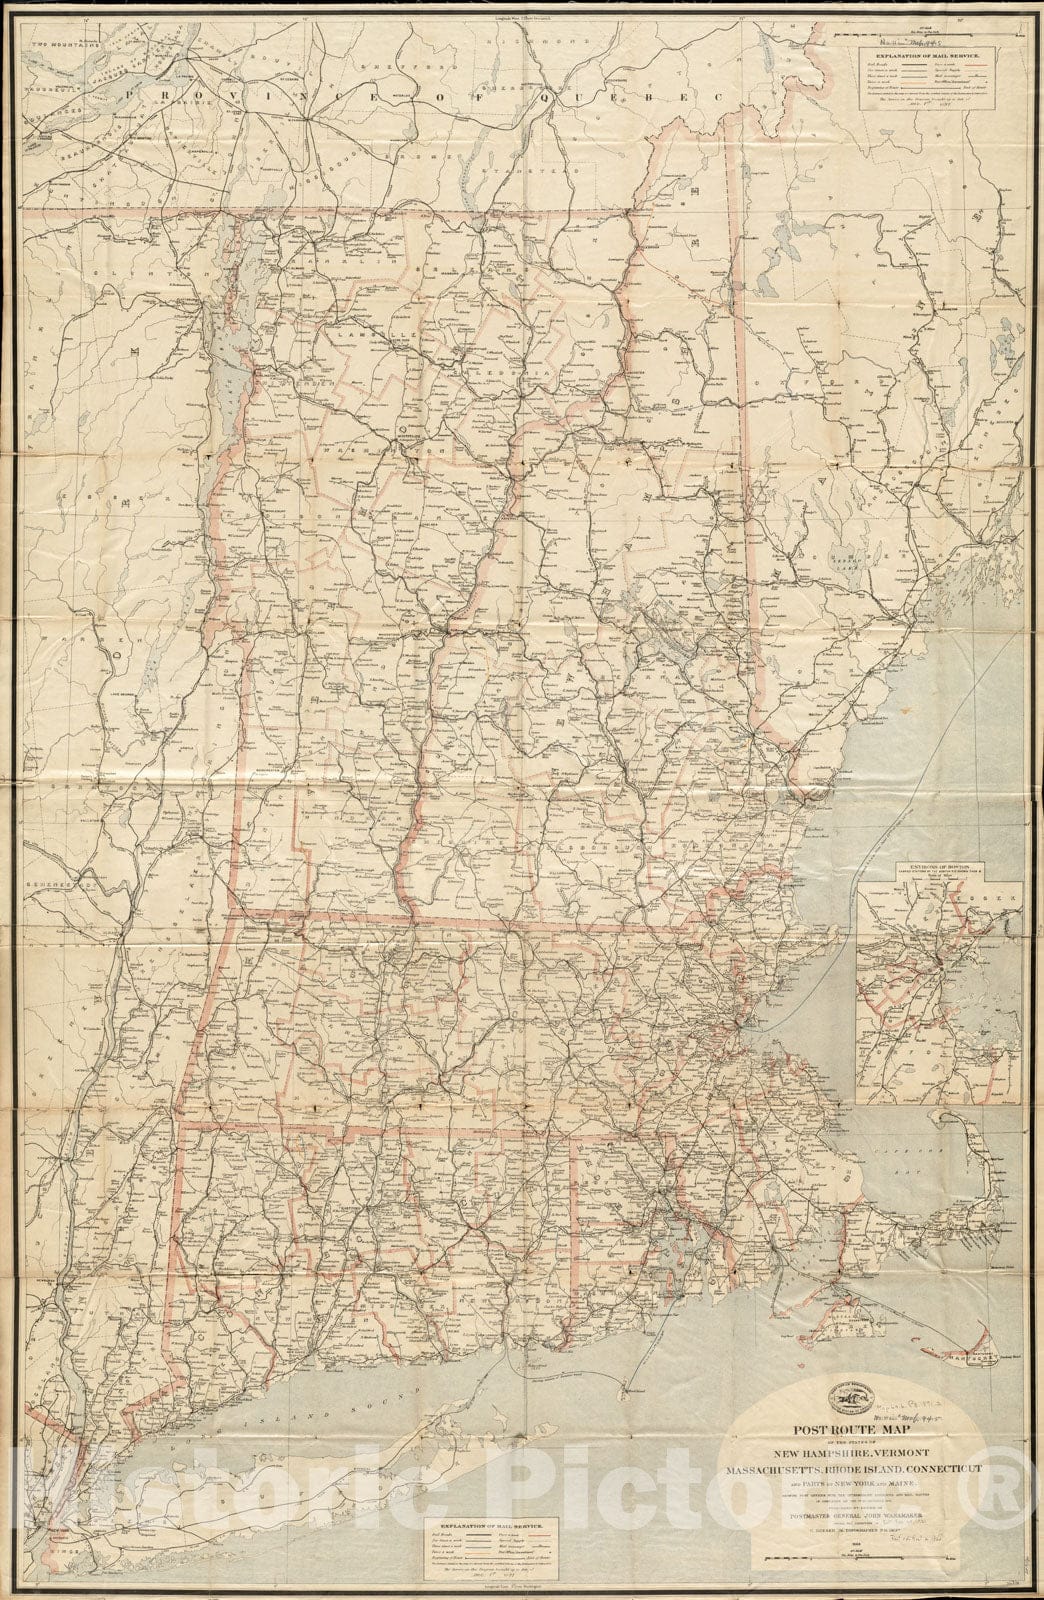 Historical Map, Post Route map of The States of New Hampshire, Vermont, Massachusetts, Rhode Island, Connecticut and Parts of New York and Maine, Vintage Wall Art